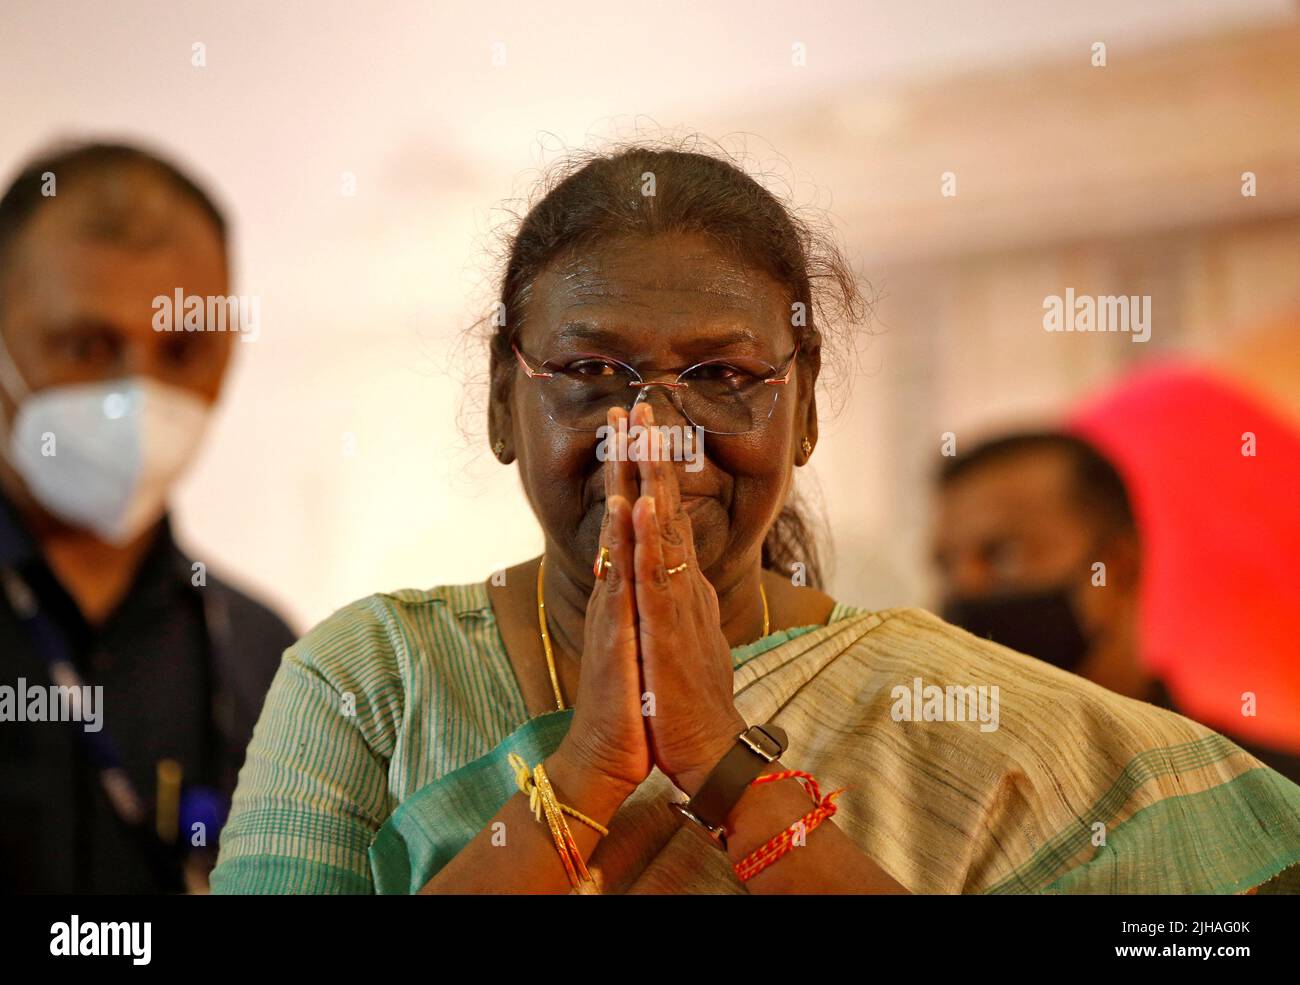 Droupadi Murmu, 64, a female politician who was nominated as presidential candidate by Prime Minister Narendra Modi's ruling Bharatiya Janata Party (BJP), greets an audience as she arrives to attend a meeting ahead of India's presidential elections, in Ahmedabad, India, July 17, 2022. REUTERS/Amit Dave Stock Photo